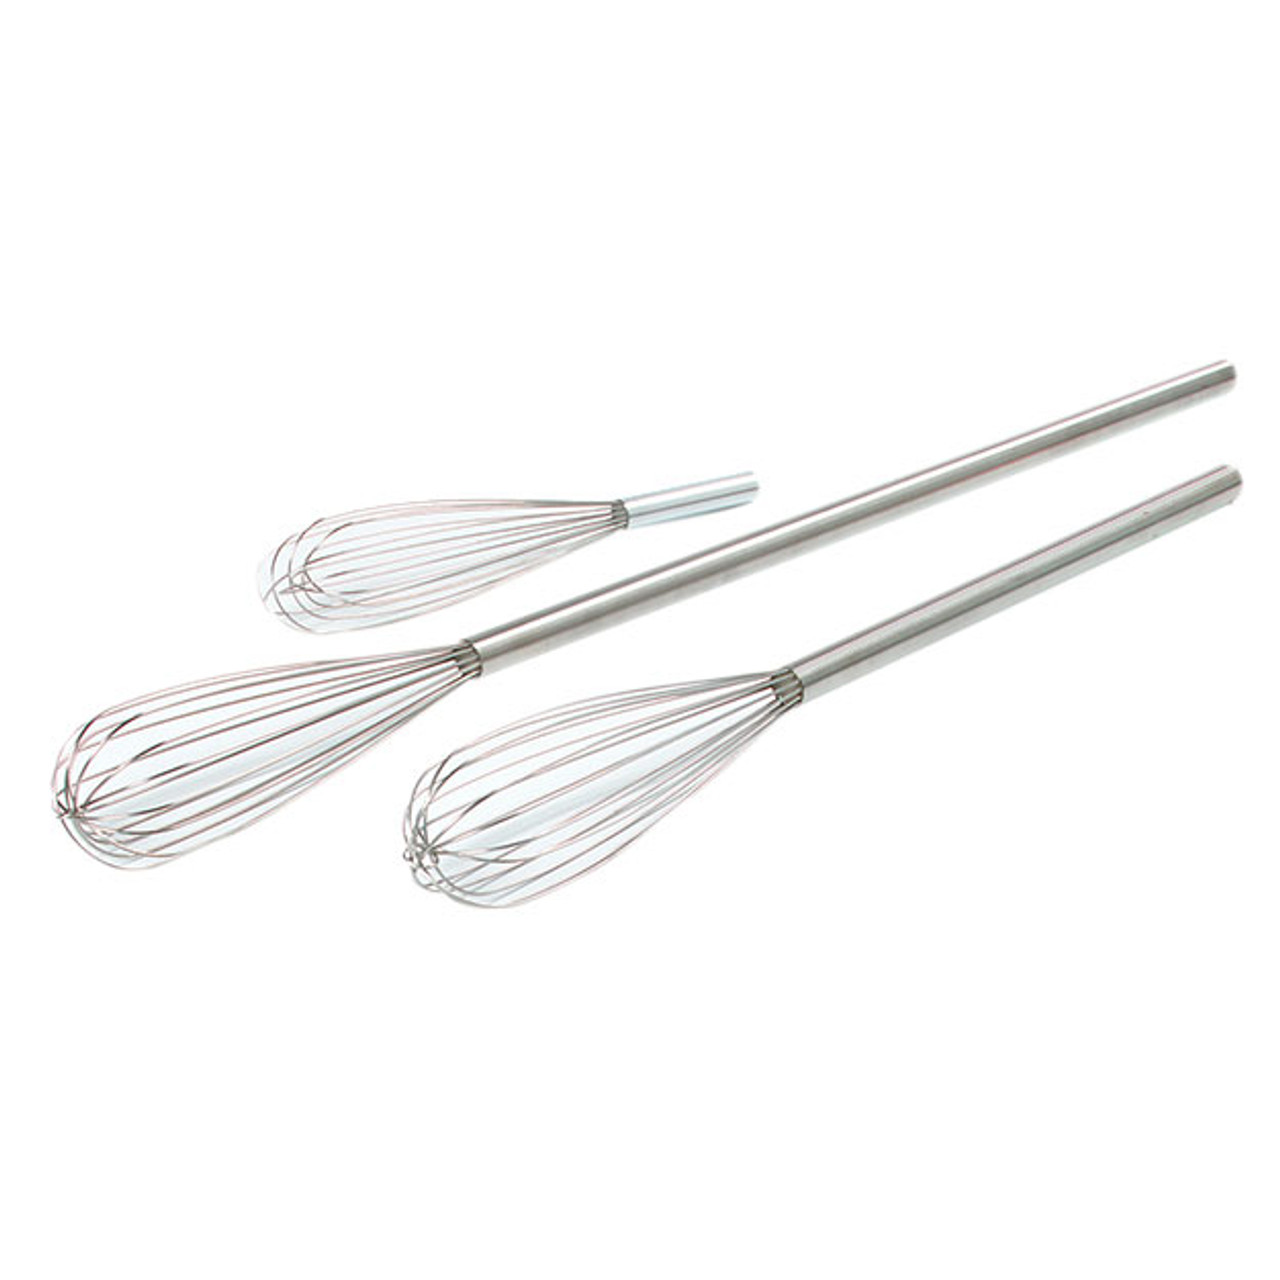 Carlisle Sparta Chef Series 48 Stainless Steel French Whip / Whisk 40682